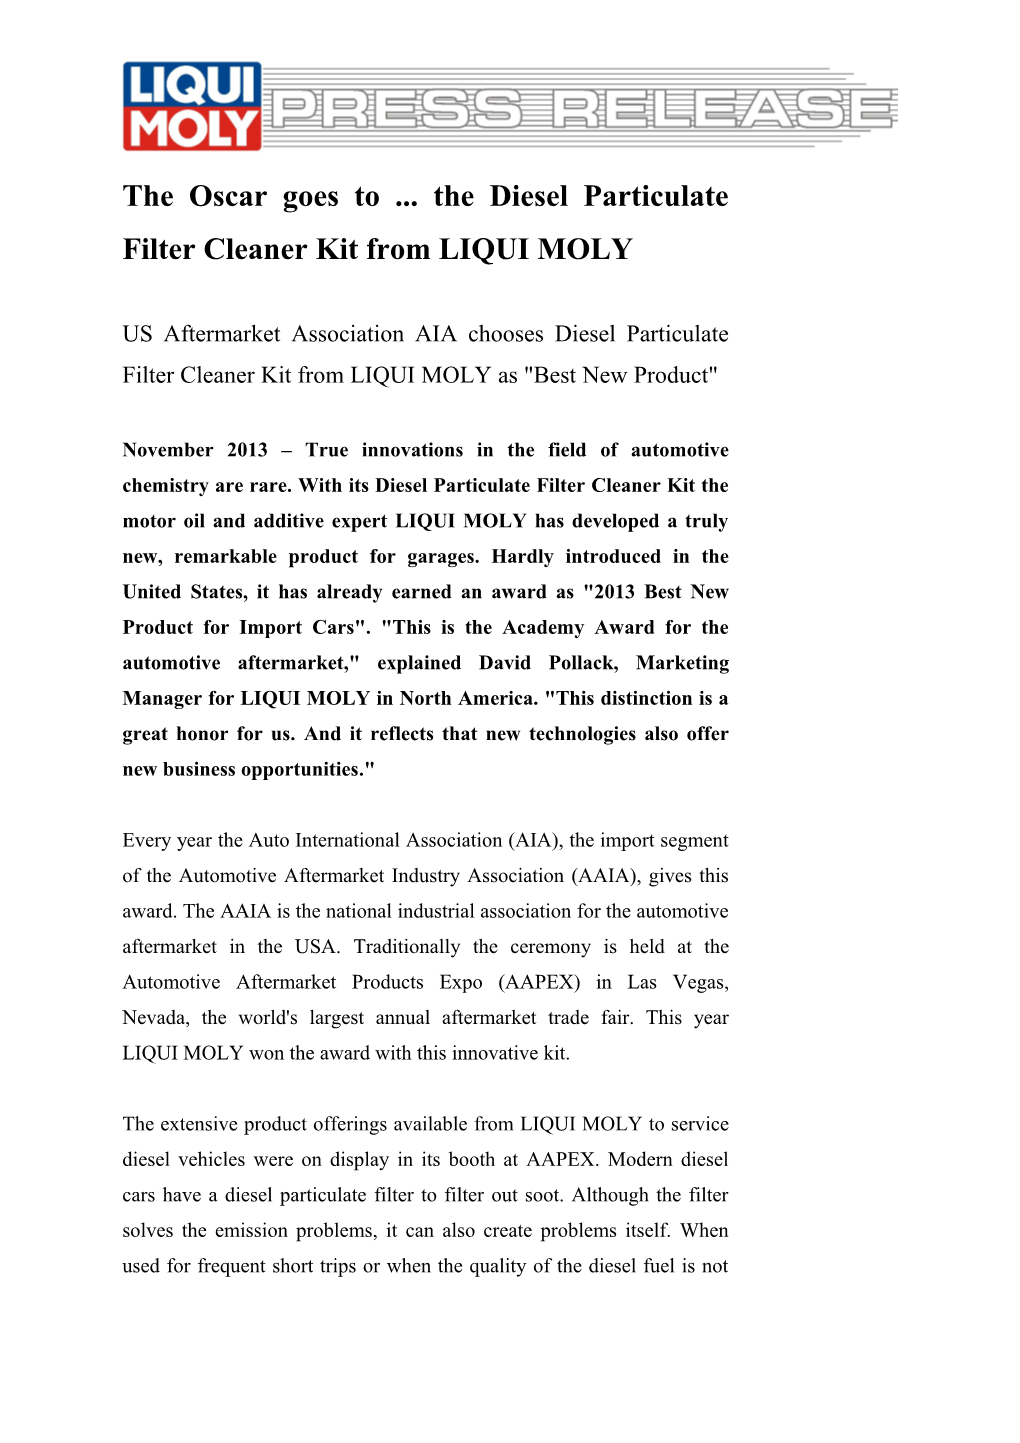 The Oscar Goes to the Diesel Particulate Filter Cleaner Kit from LIQUI MOLY